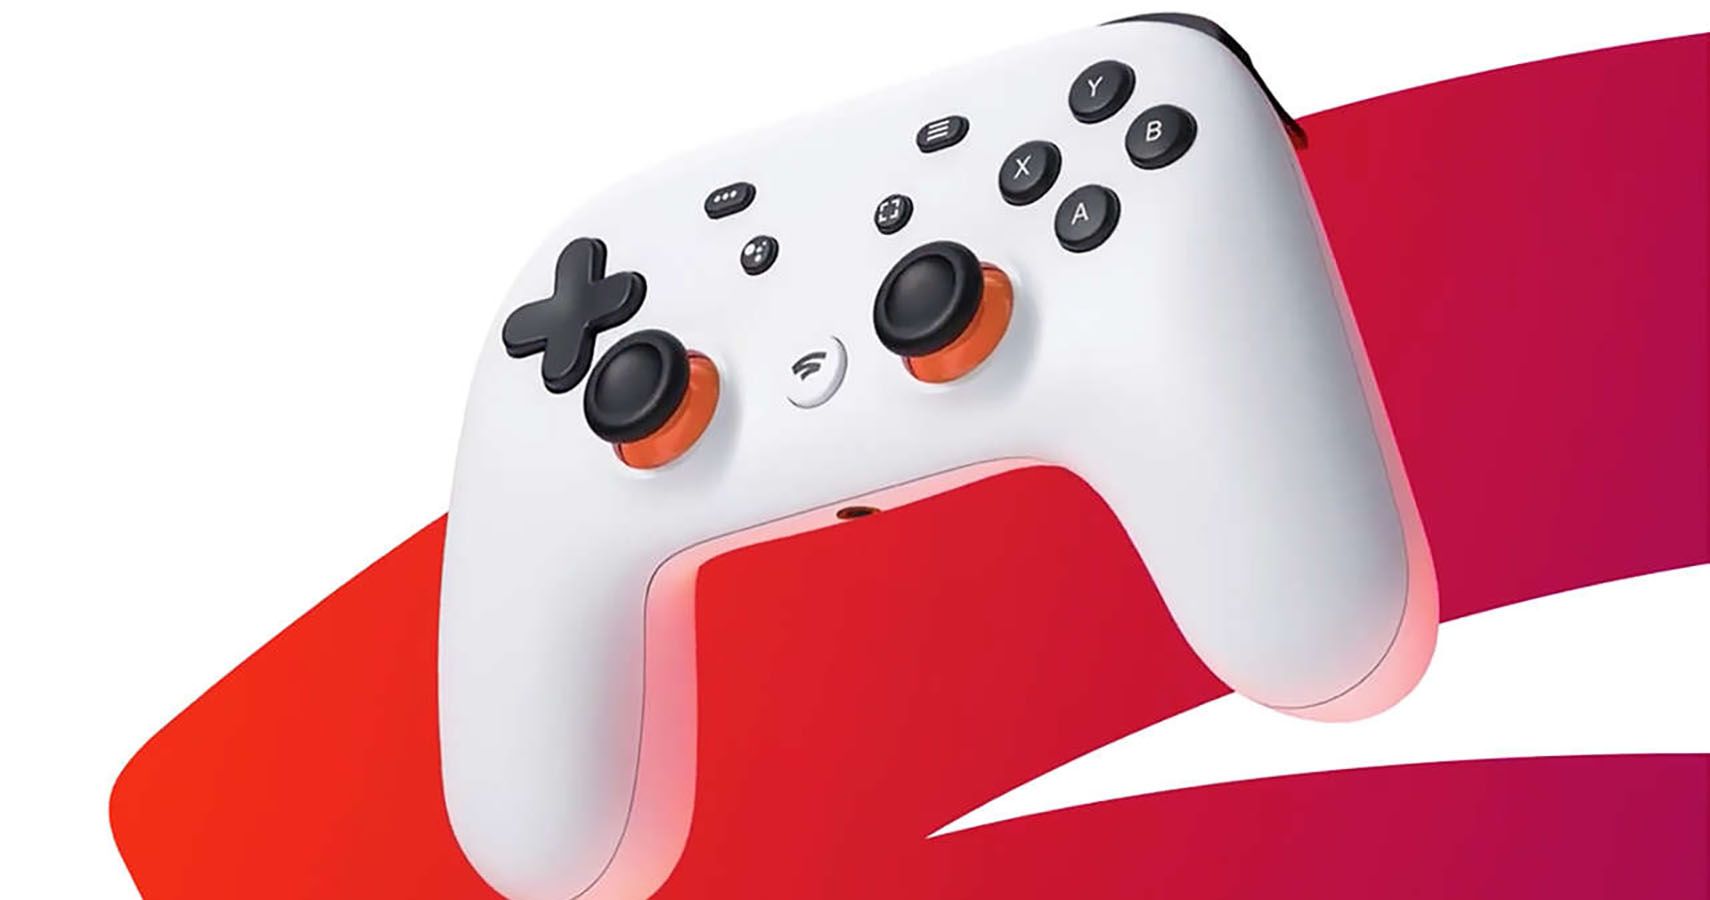 Promotional image of Google Stadia controller